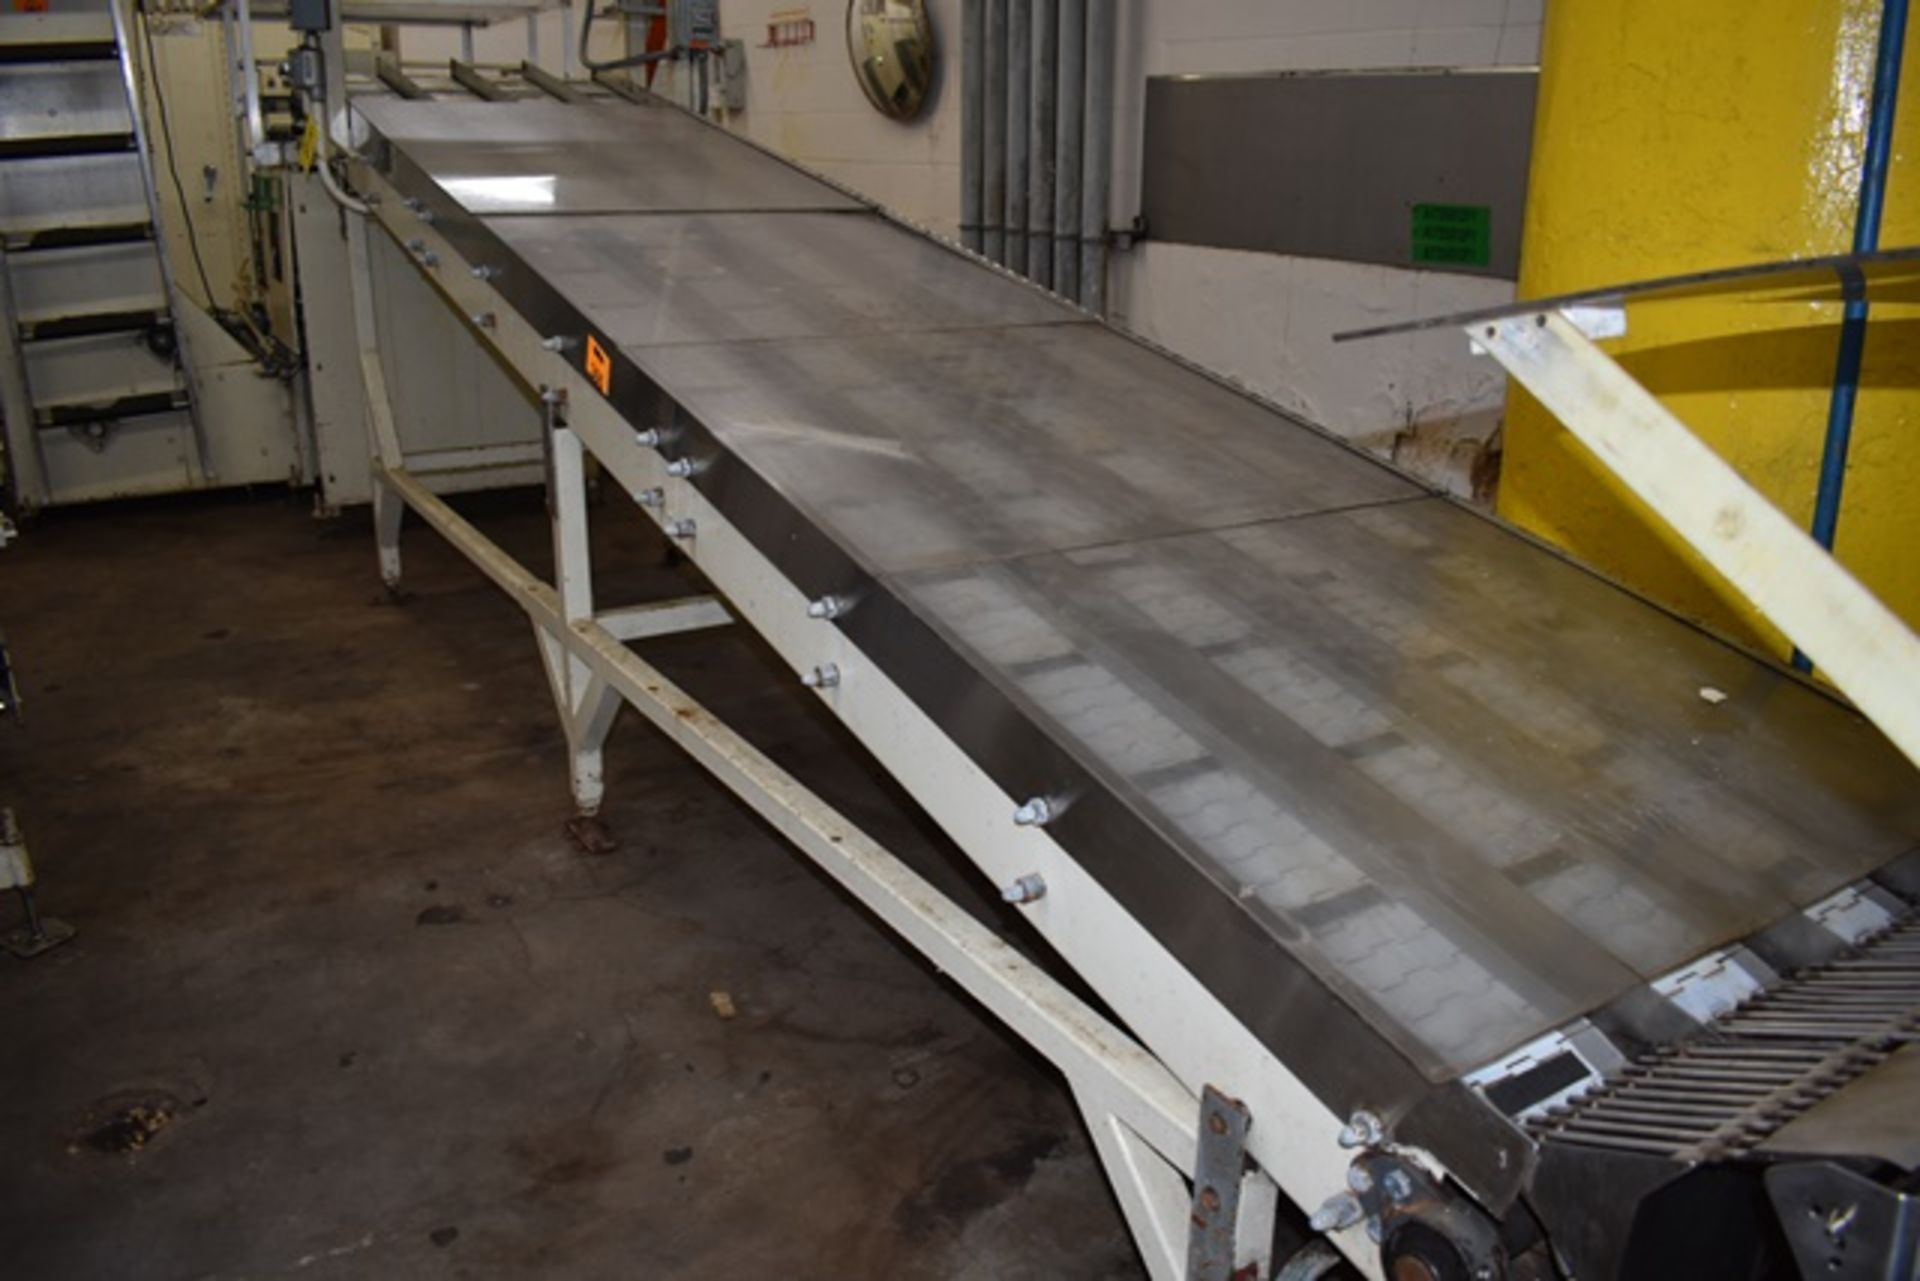 Nercon incline conveyor, 4 lanes, 36"W x 15' L with 8"W table top conveyor belt